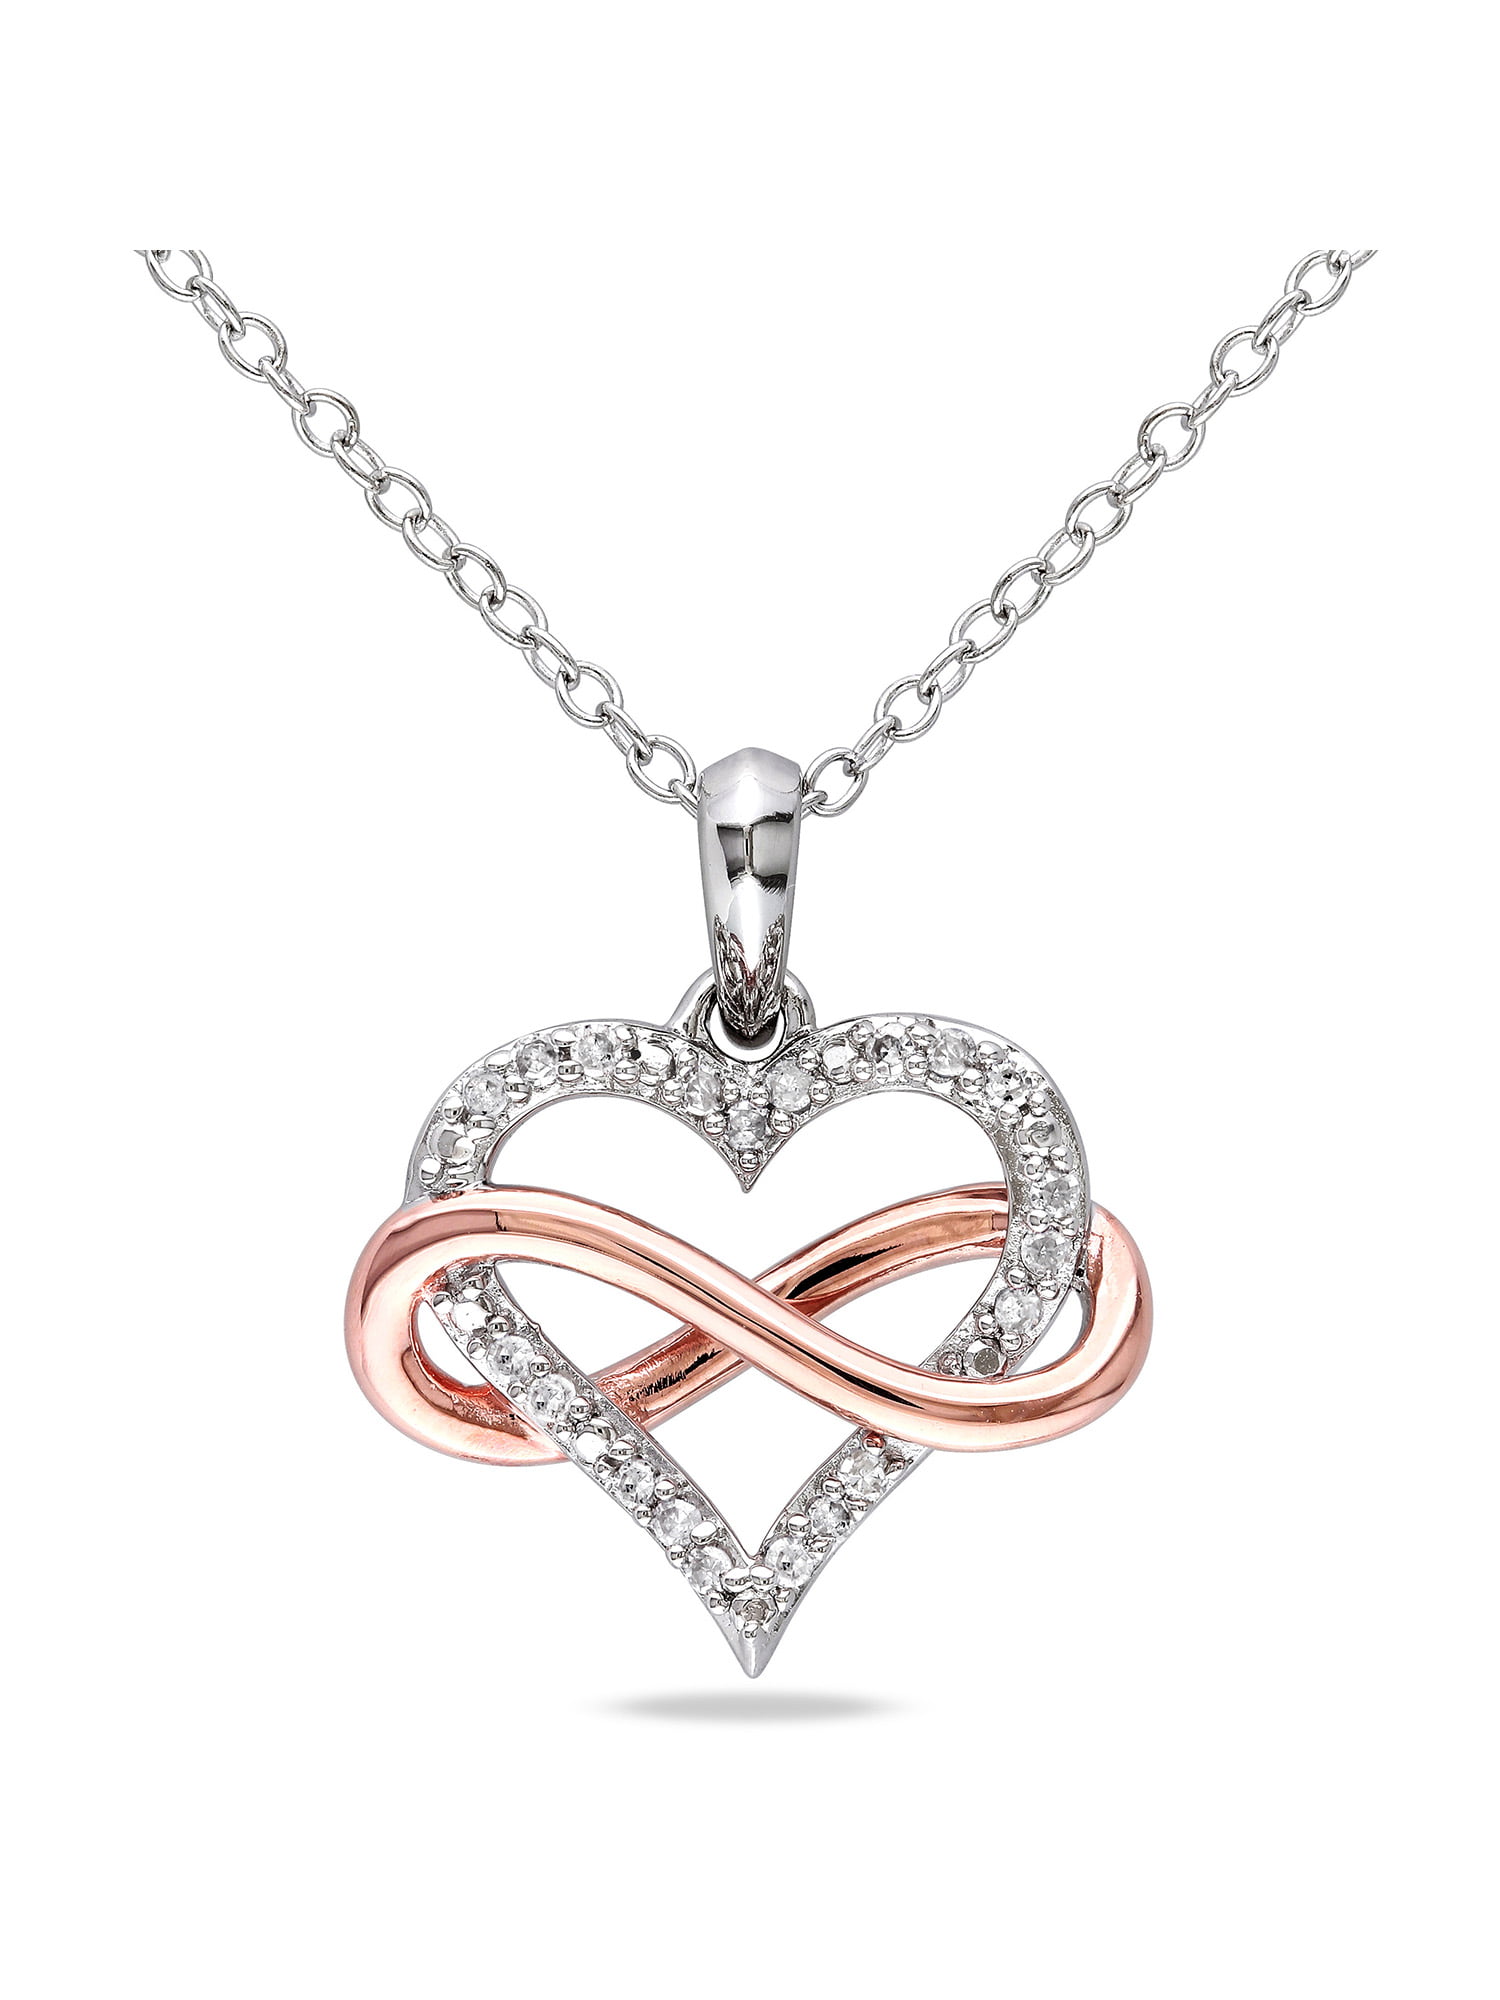 Sterling Silver Diamond MOM Infinity Love Heart Pendant Necklace w Chain